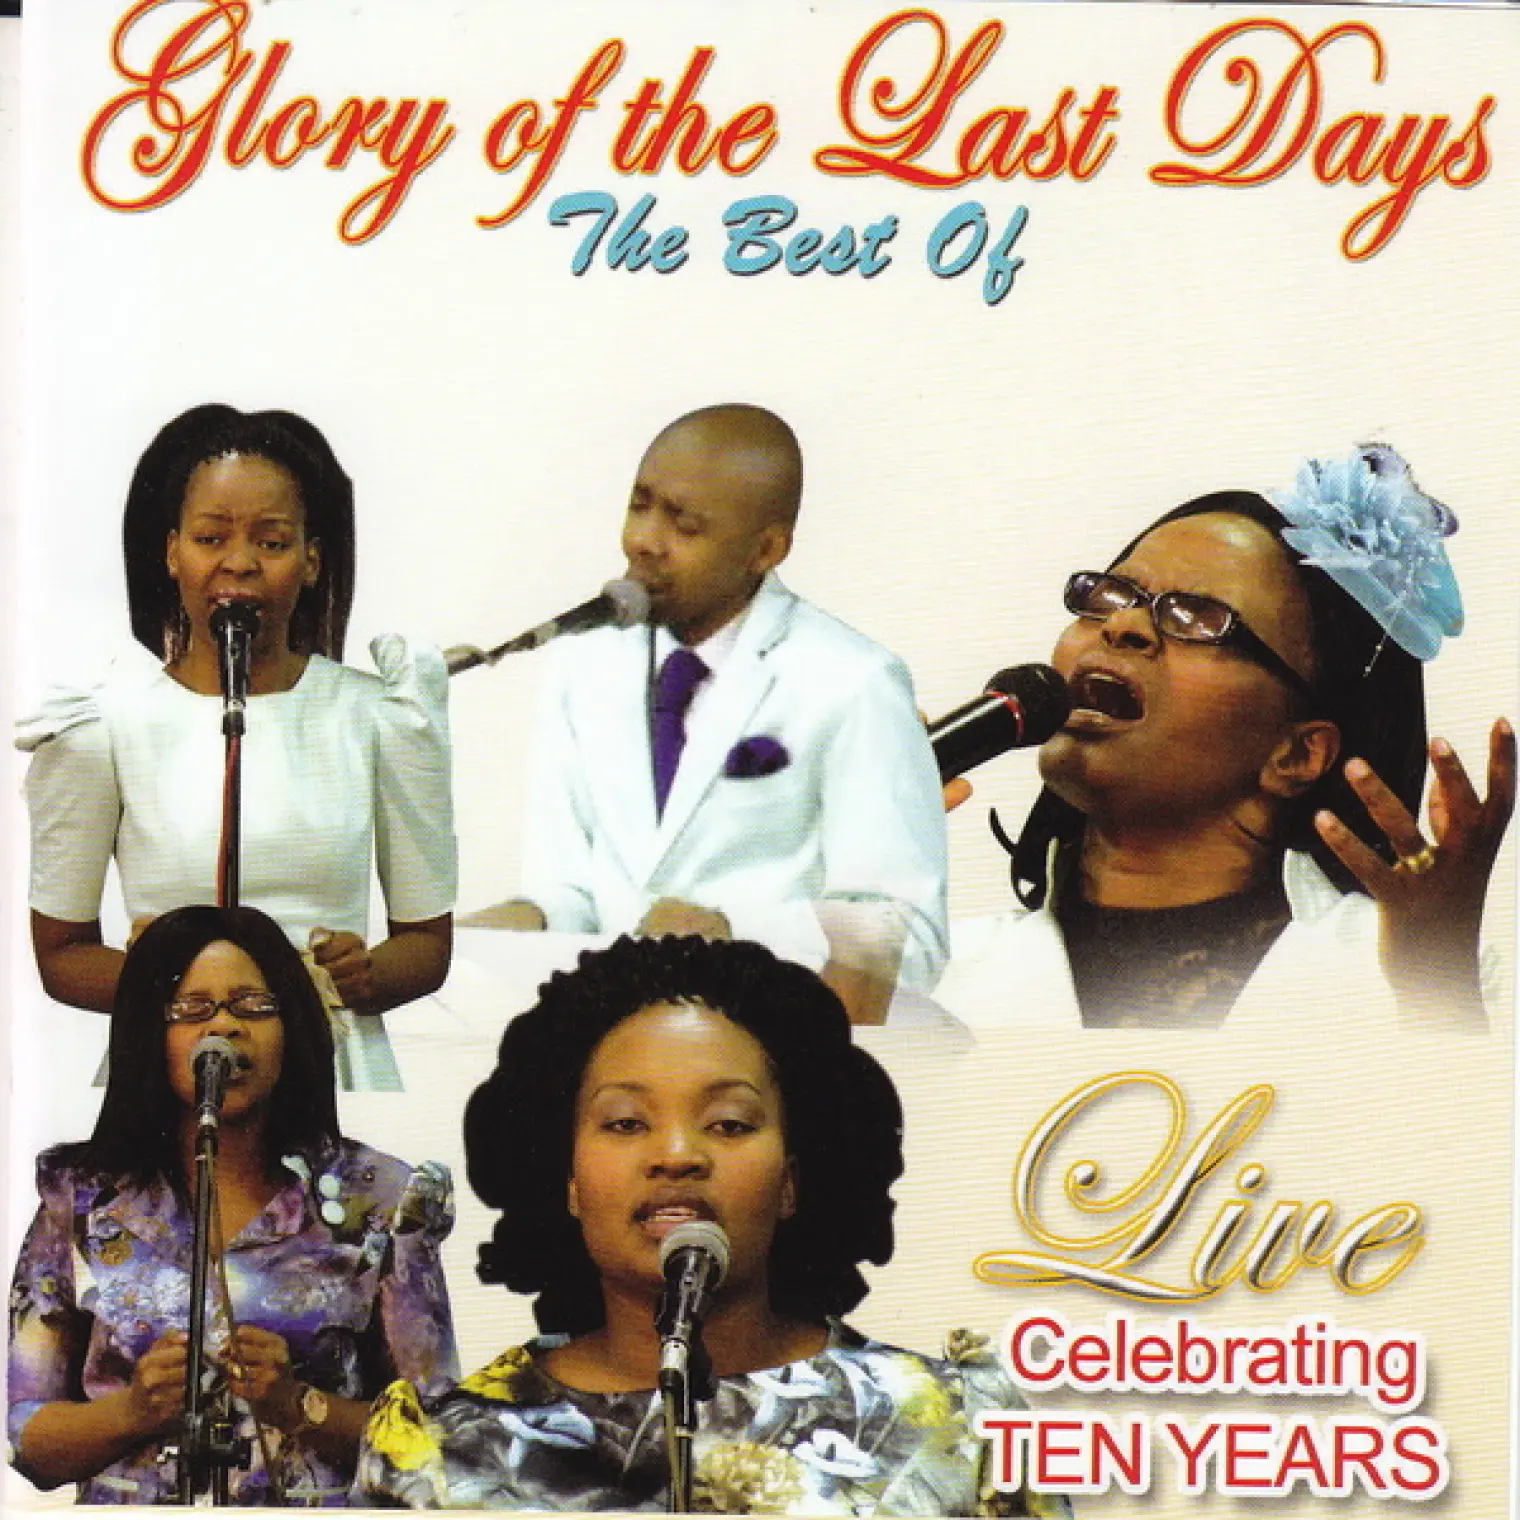 The Best Of -  Glory of the Last Days 